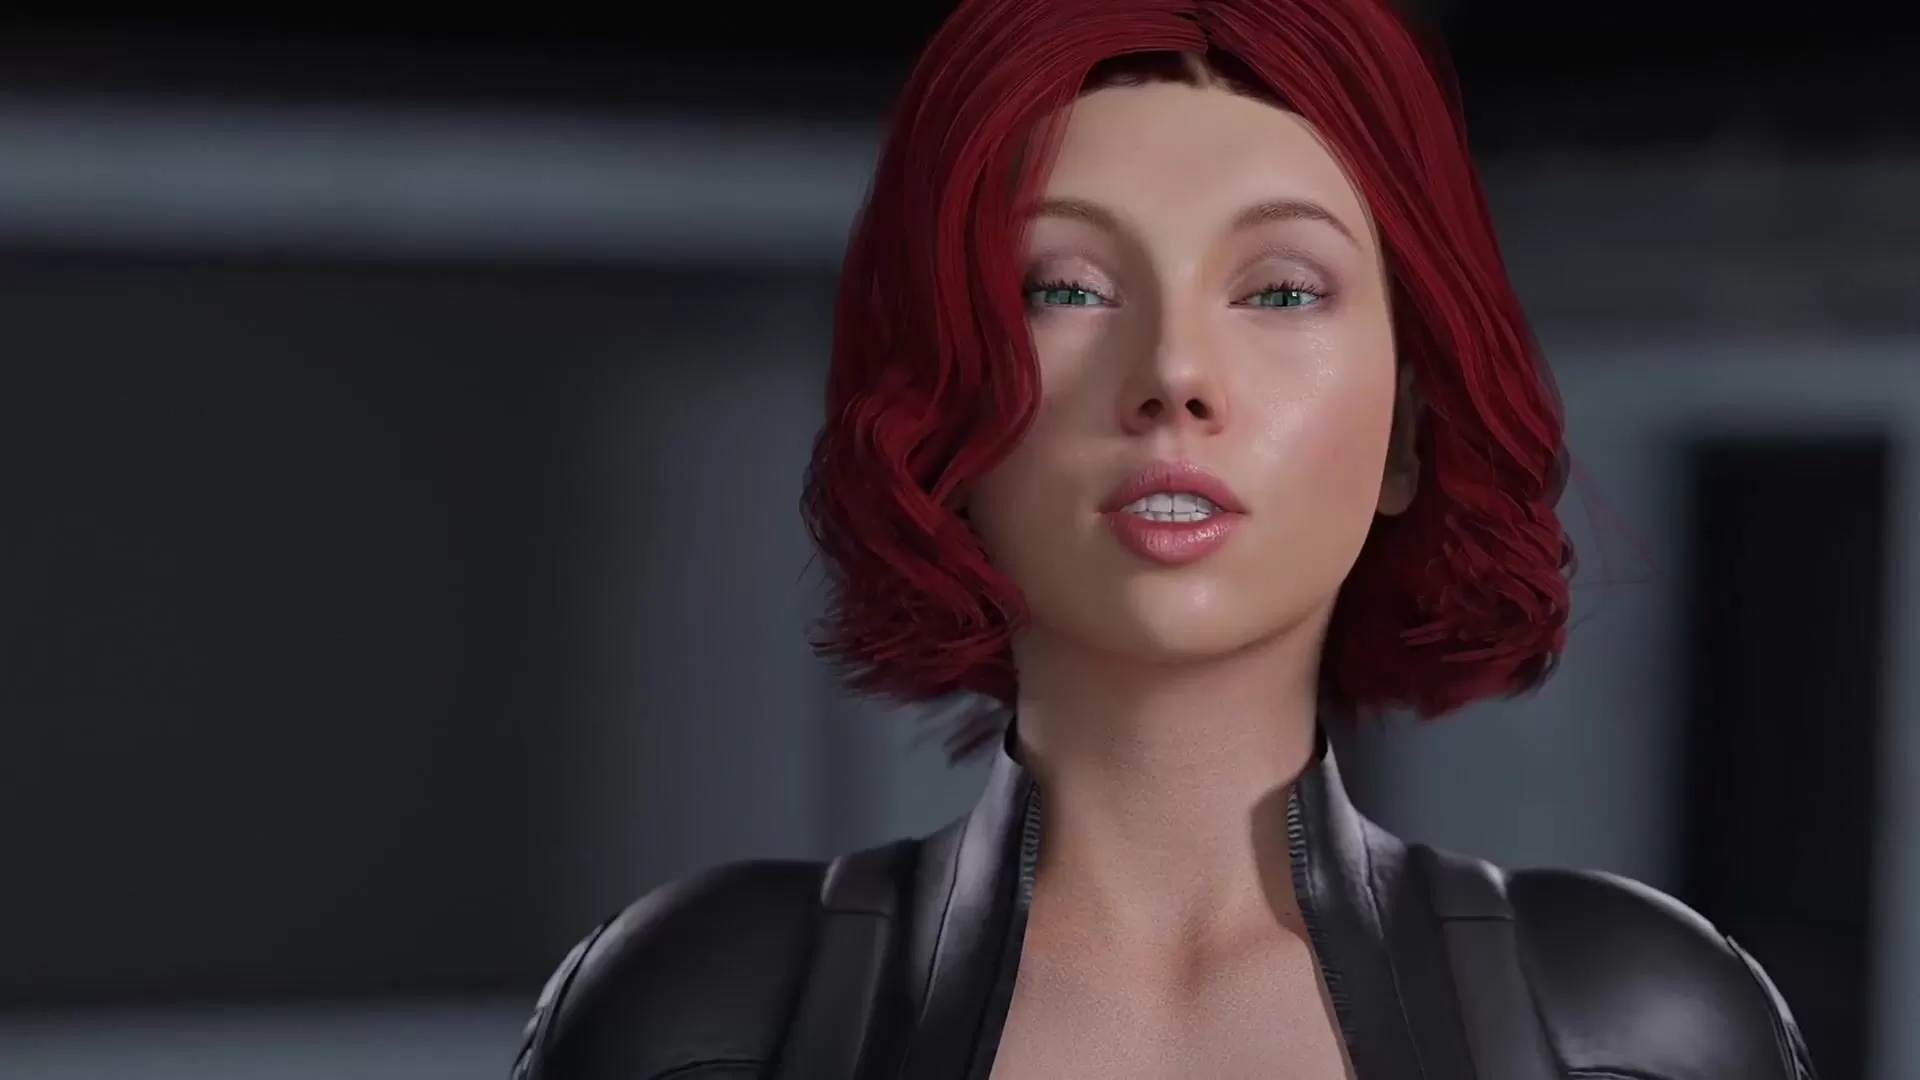 Marvel - Black Widow's Recruitment Requirements (Animation with Sound)  watch online